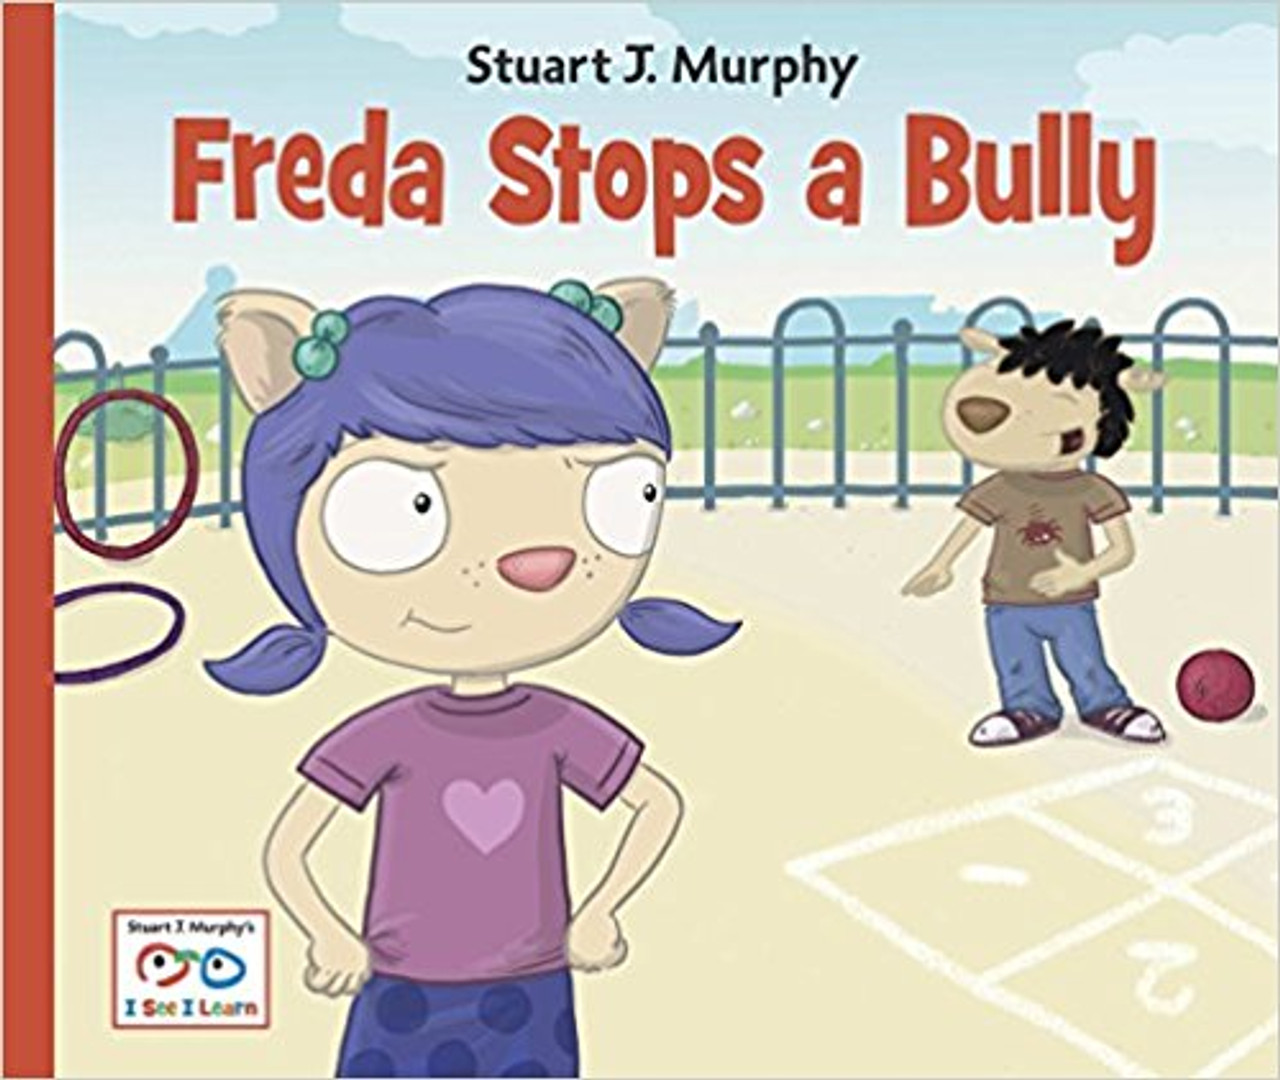 Freda loves her new shoes, but when she wears them, a boy at school makes fun of her. With the support of her friends, parents, and teachers, Freda learns how to deal with the bully and stand up for herself. Stuart J. Murphy uses Visual Learning strategies to help young children see and learn how to deal with bullyinga key emotional skill.